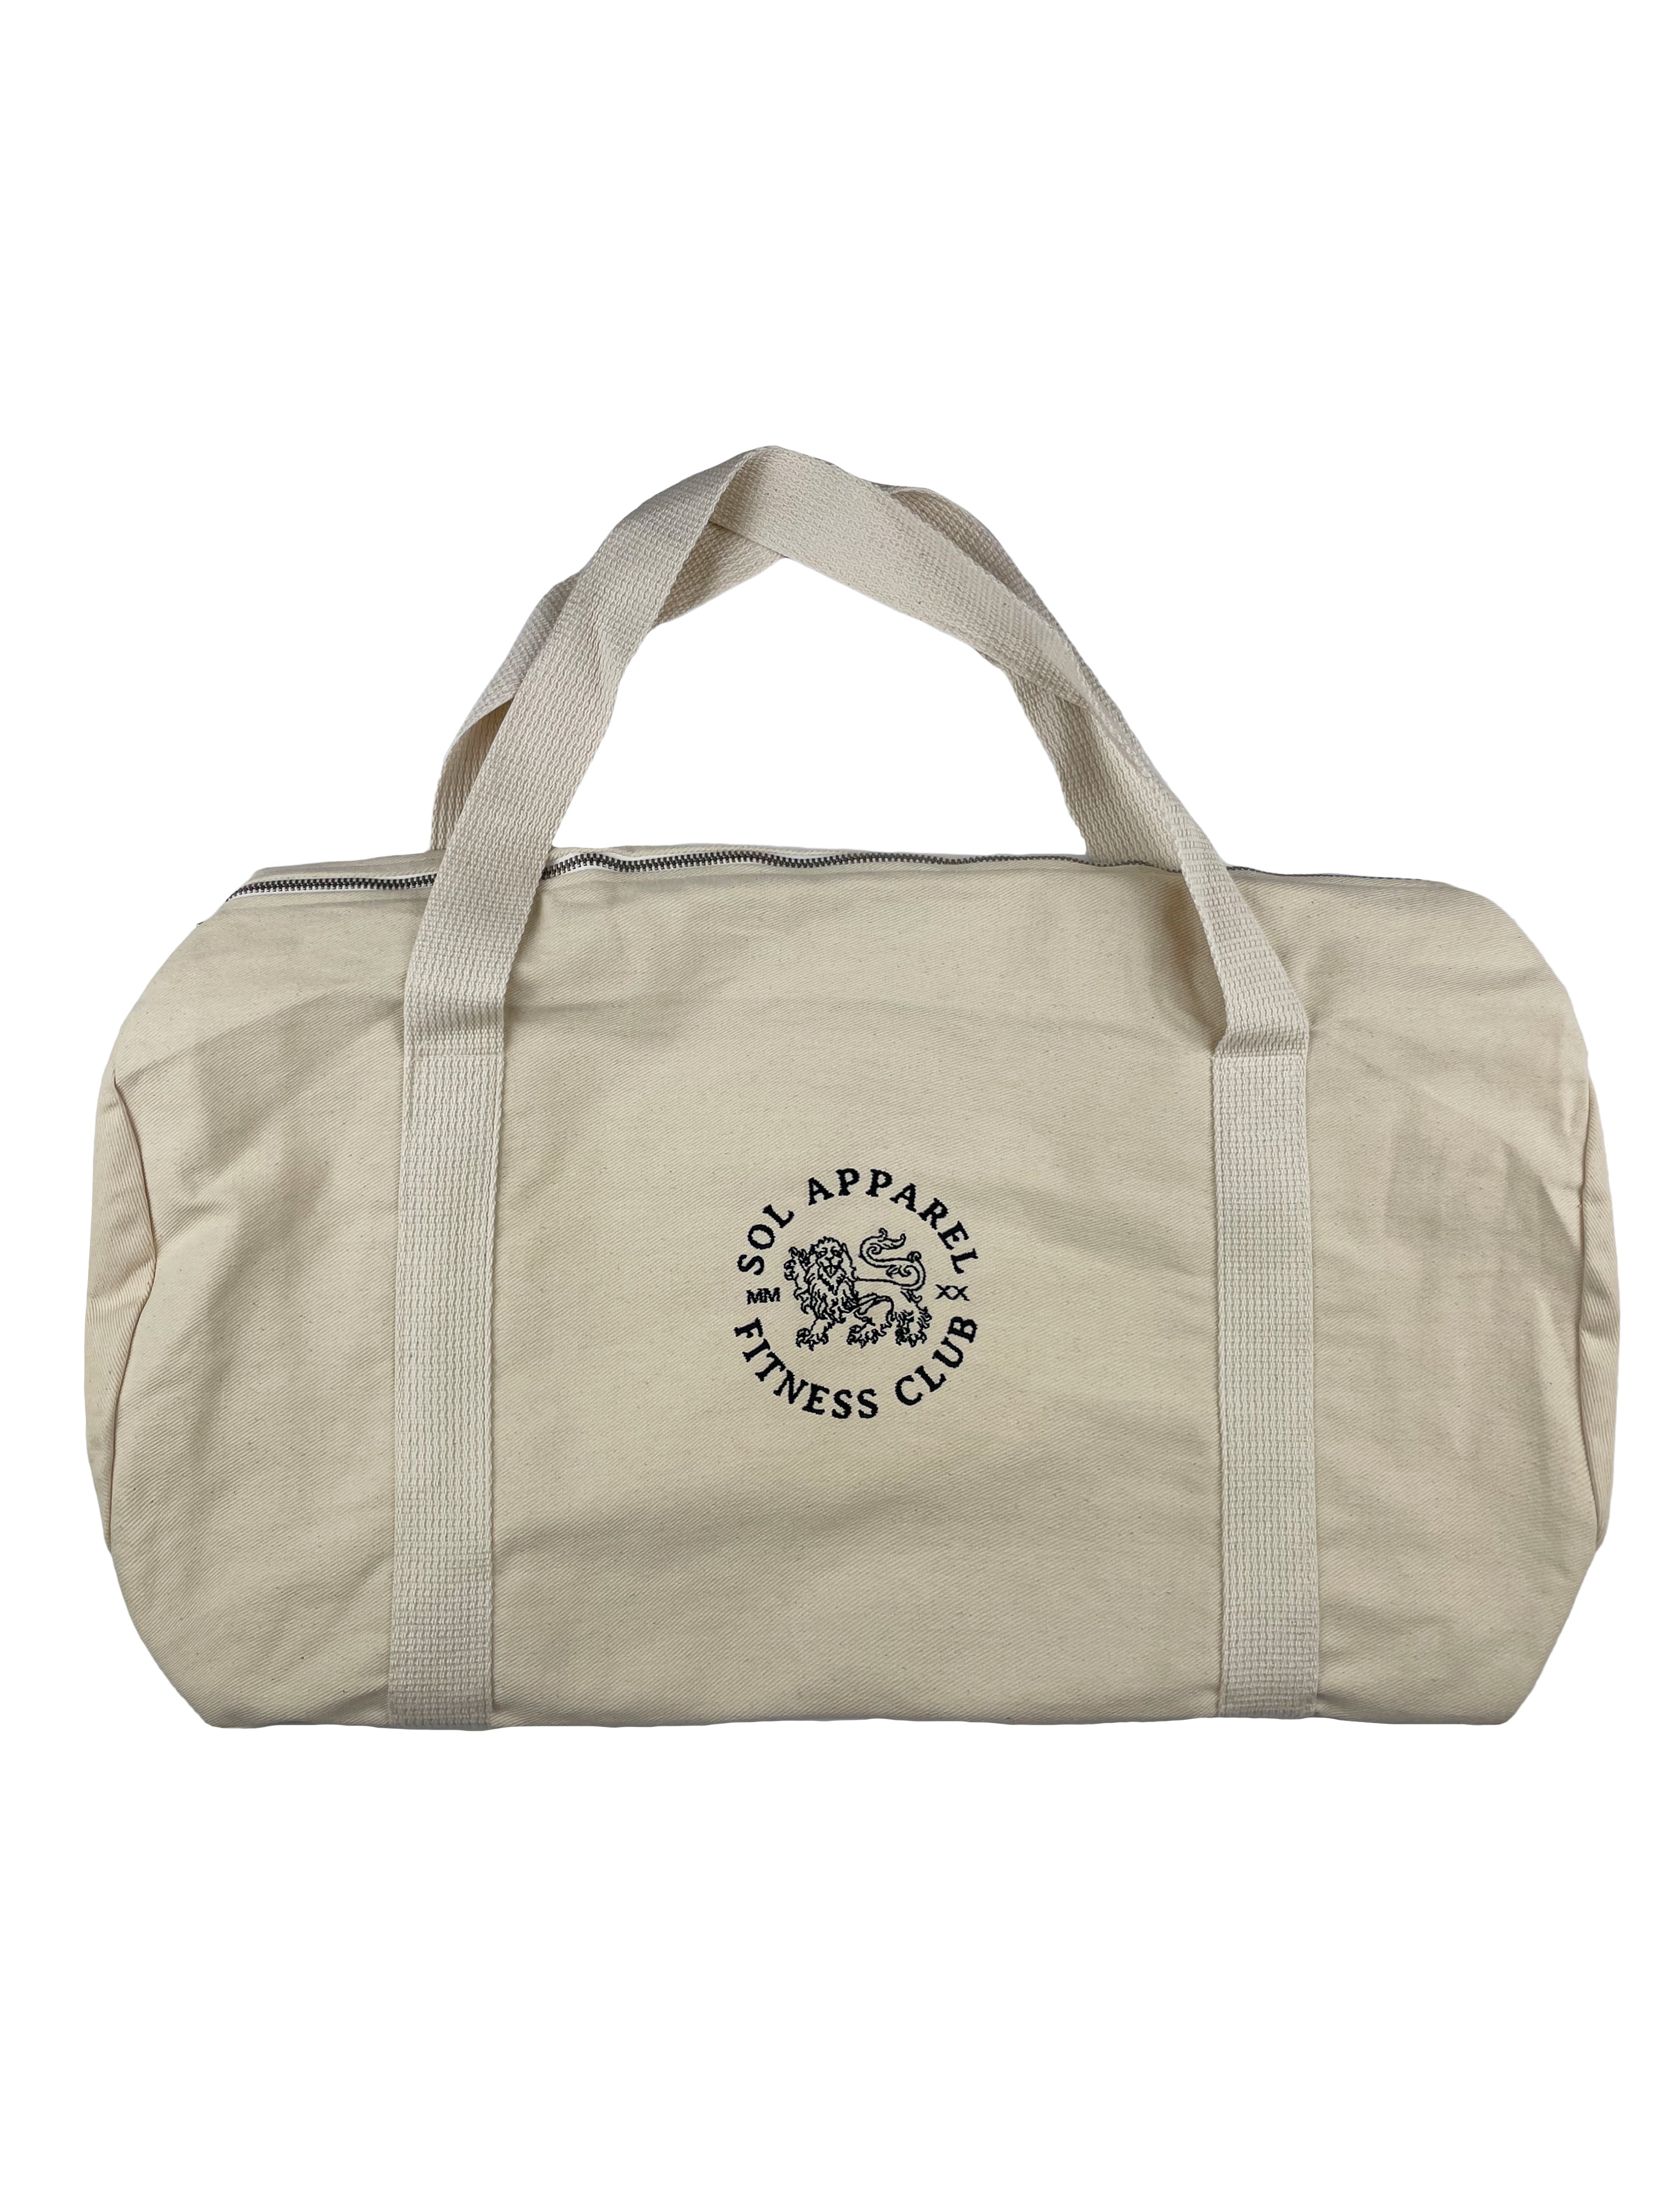 cream colored cotton gym duffel bag with black embroidered logo of a lion and the words sol apparel fitness club